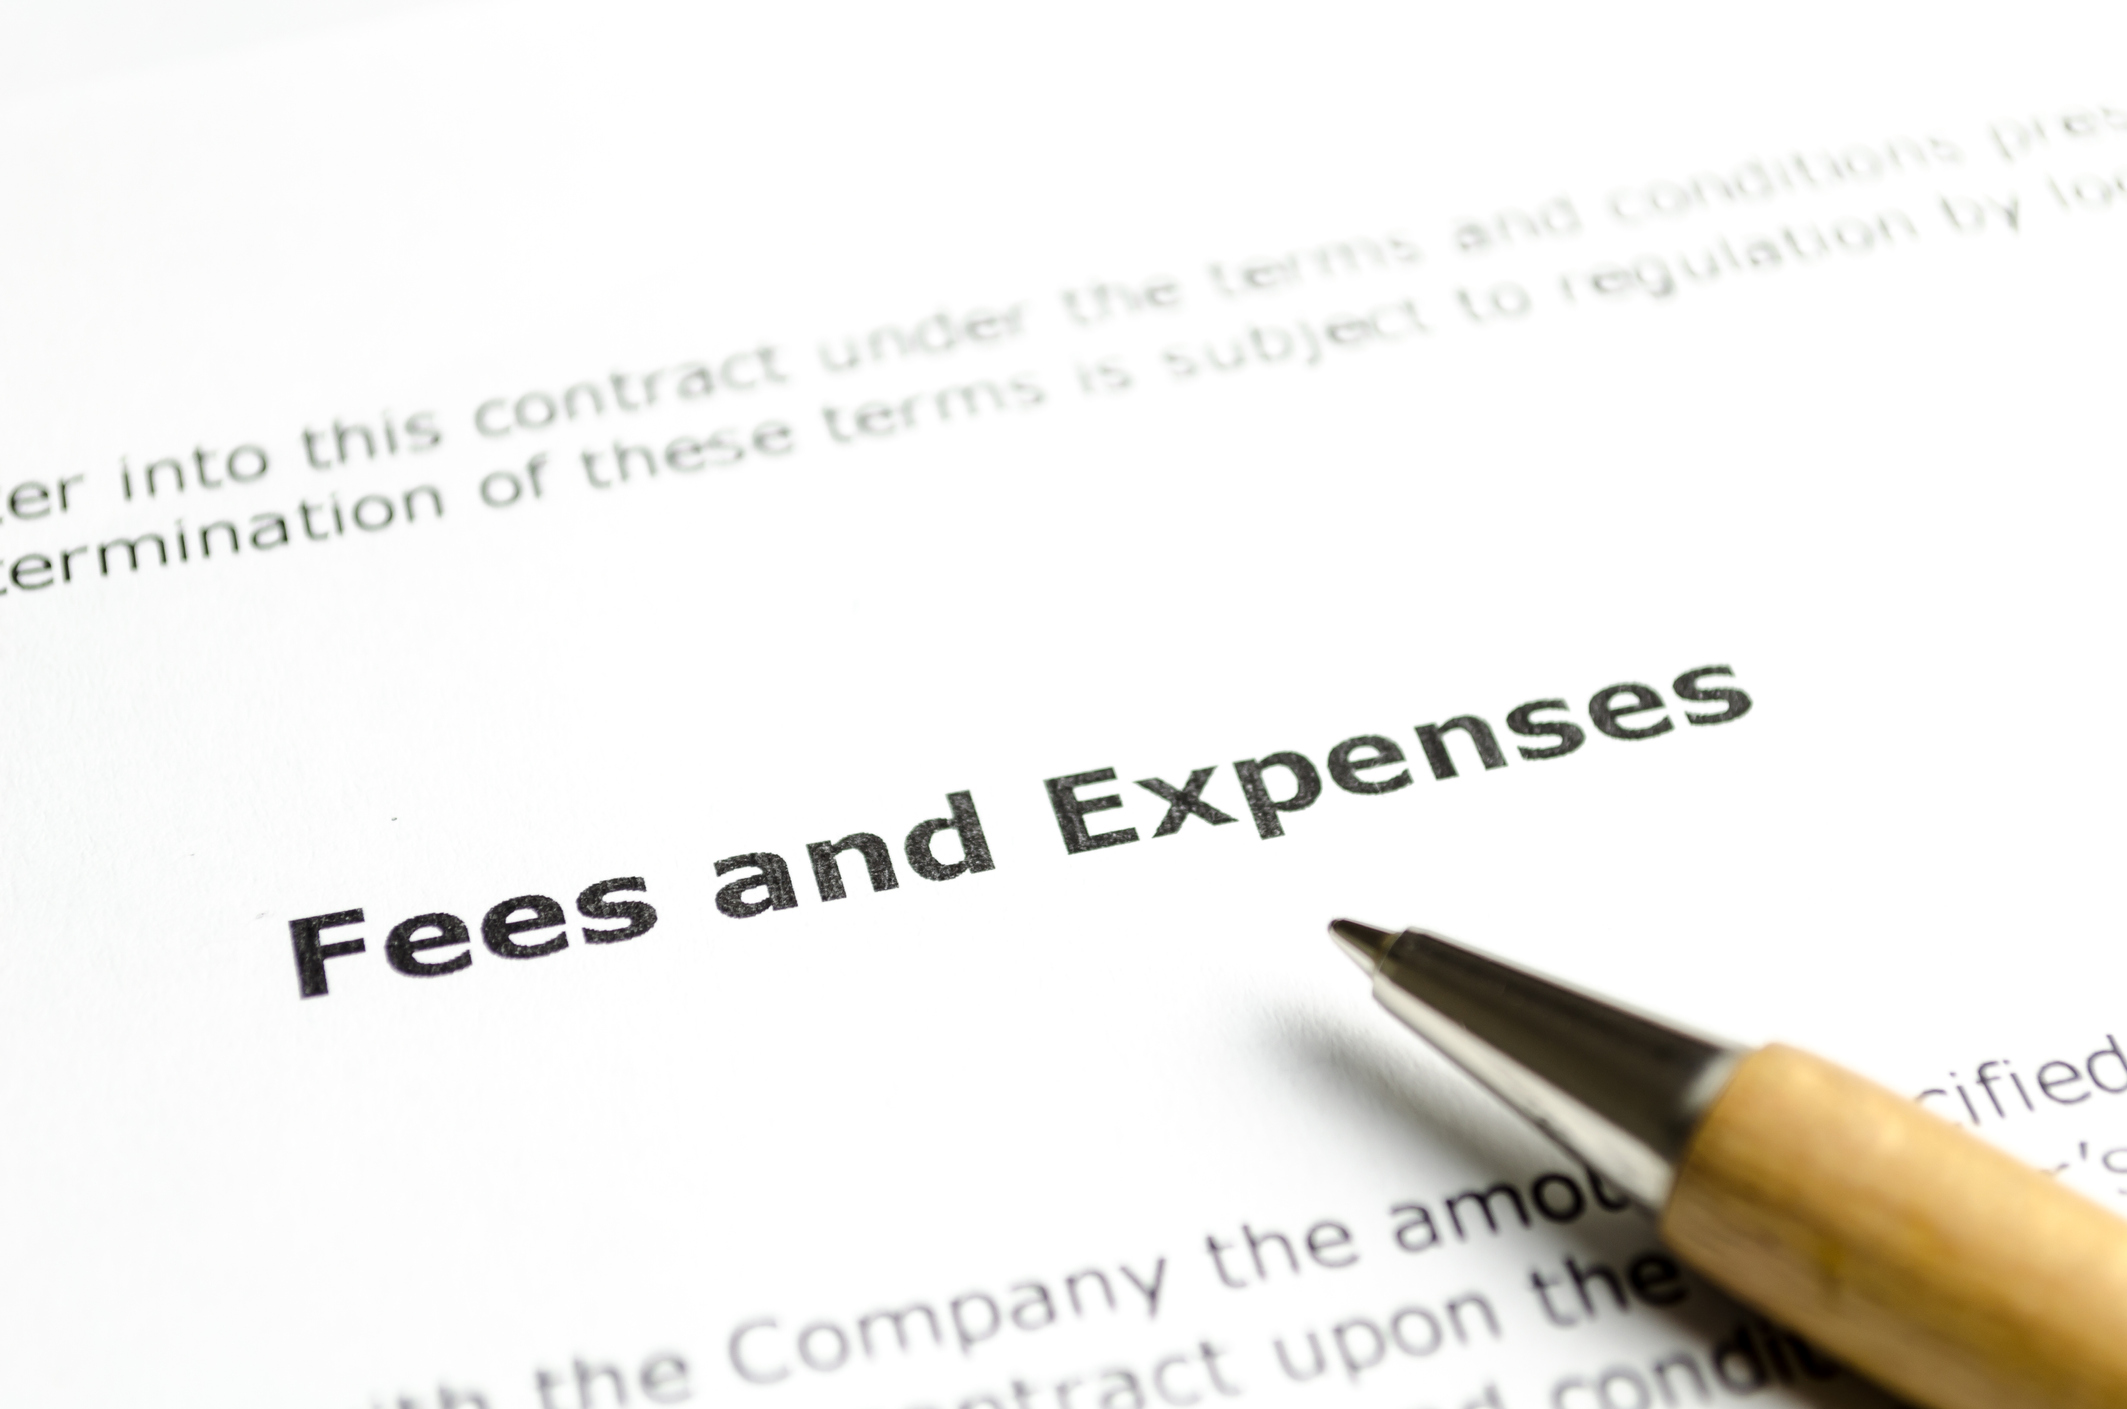 Fees and expenses with wooden pen